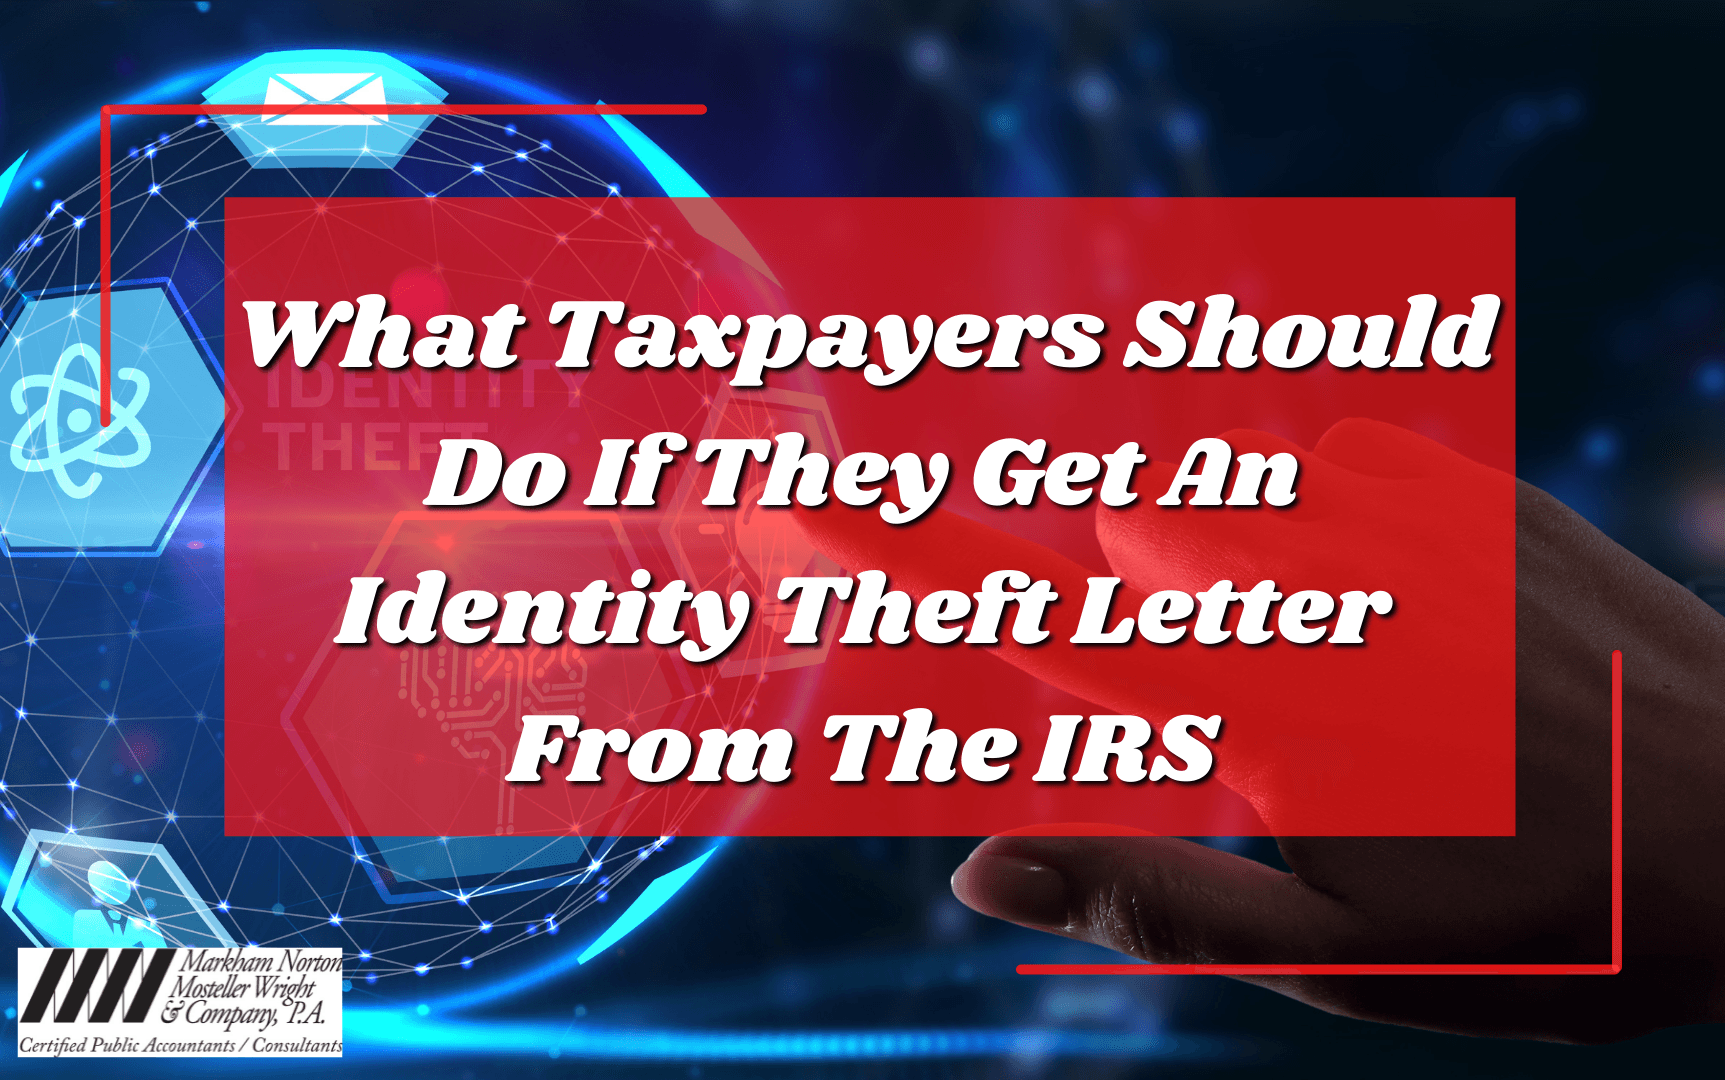 What to do if the IRS sends you an identity theft letter.